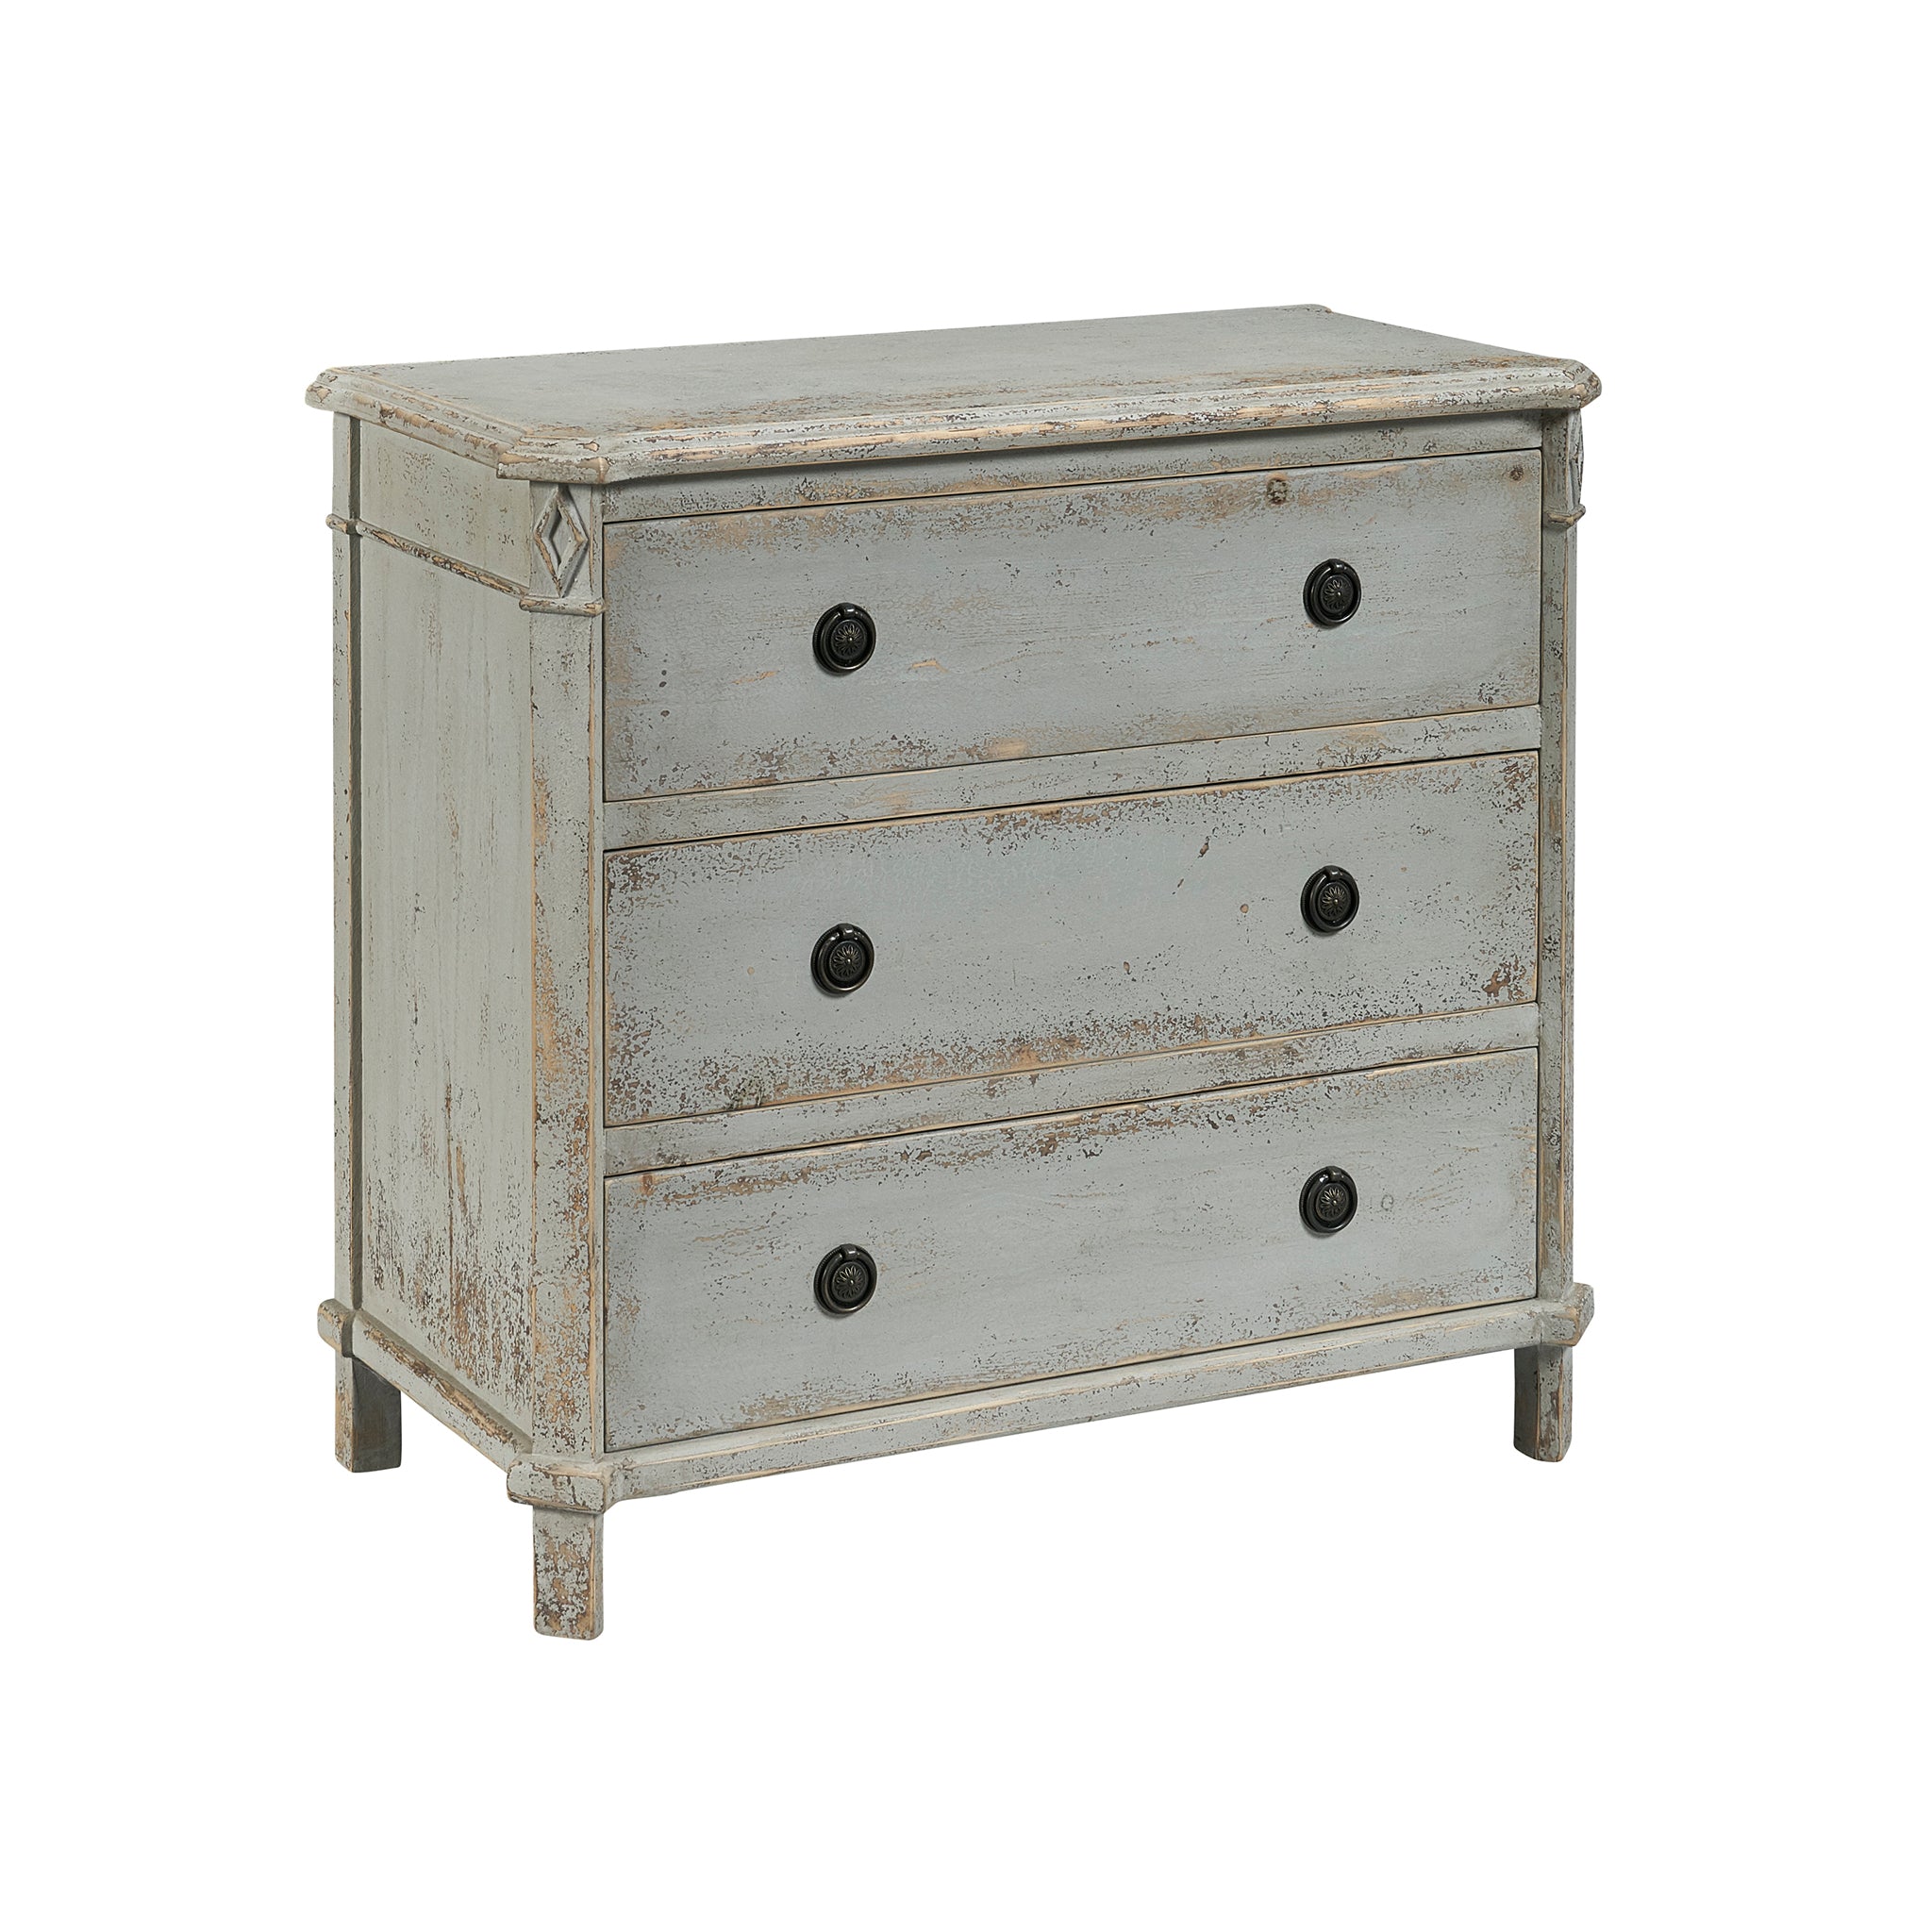 Isometric View of the Antique French Gray Linen Chest on a White Background